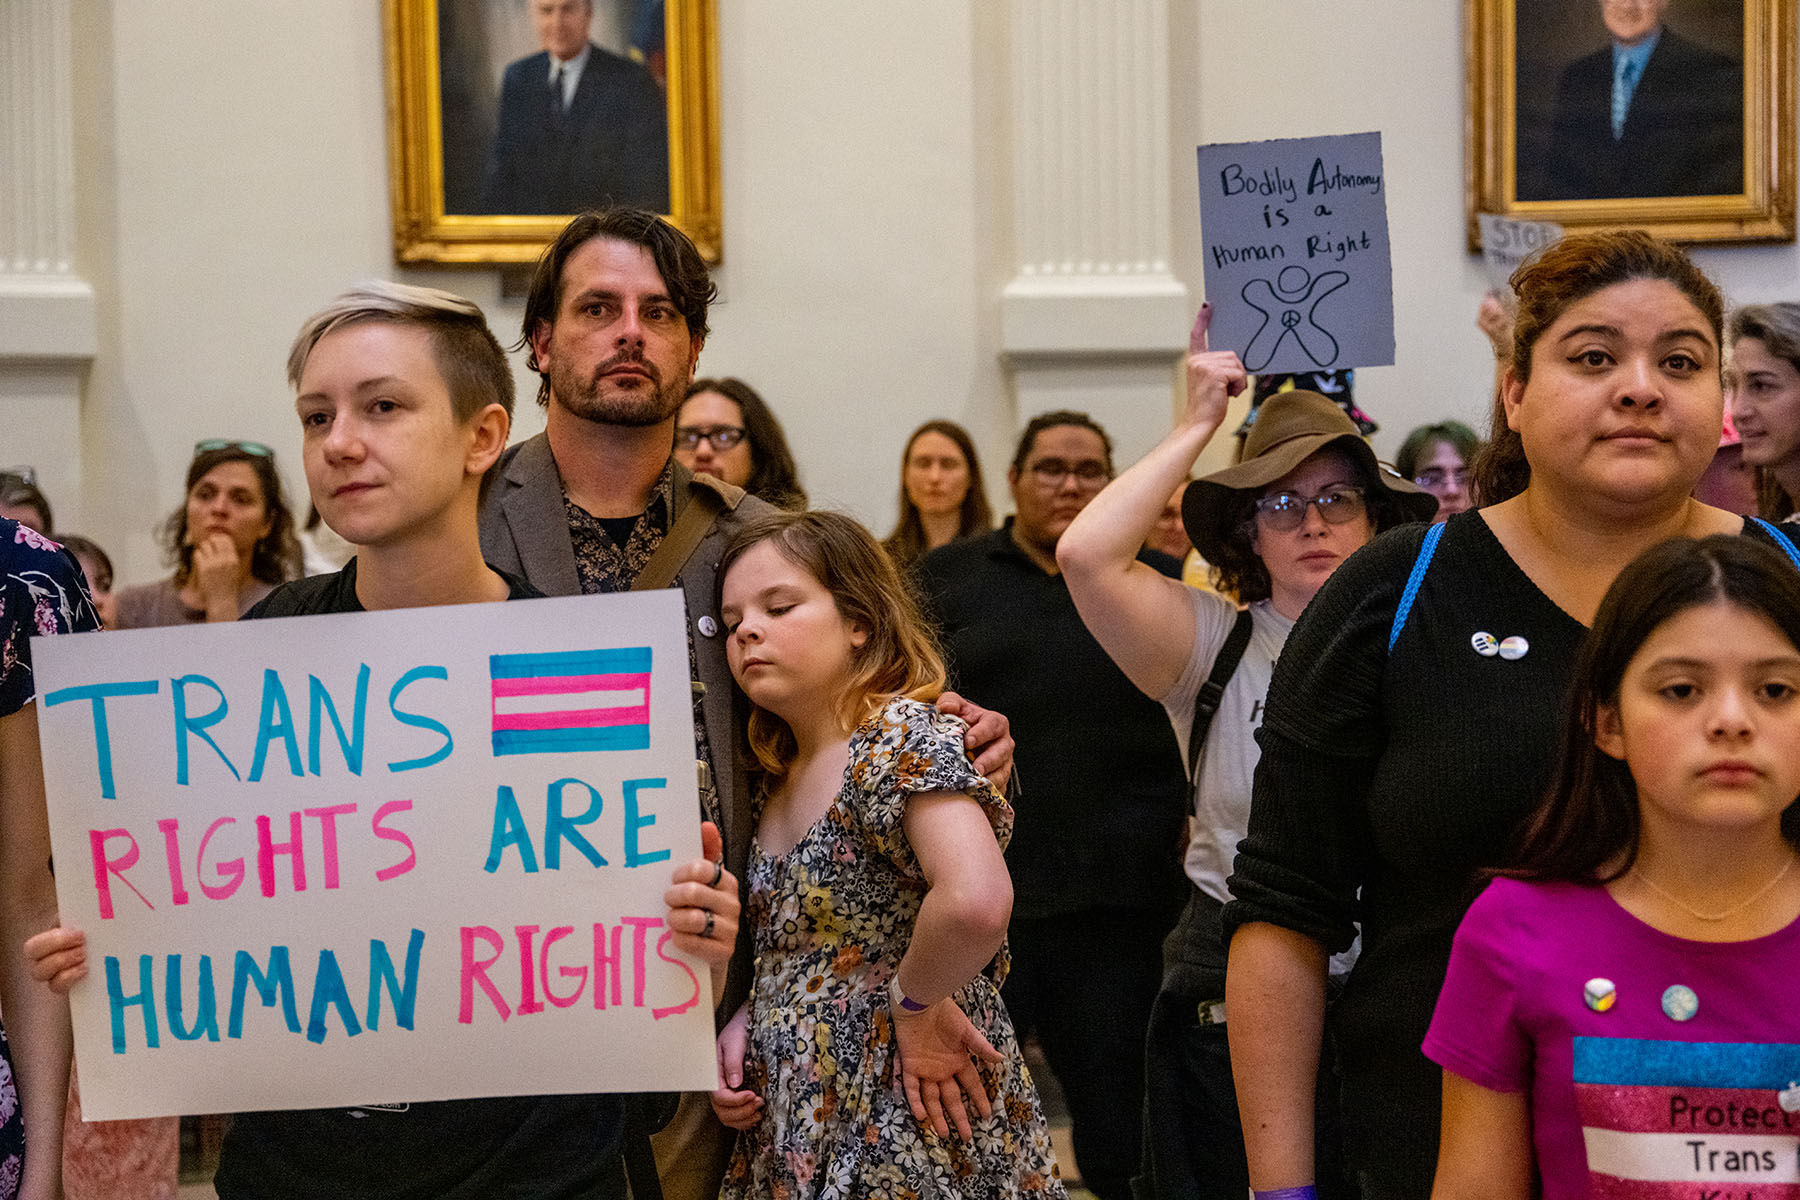 Abortion rights demonstrators and transgender rights activists gather during an abortion rights demonstration at the Texas State Capitol.